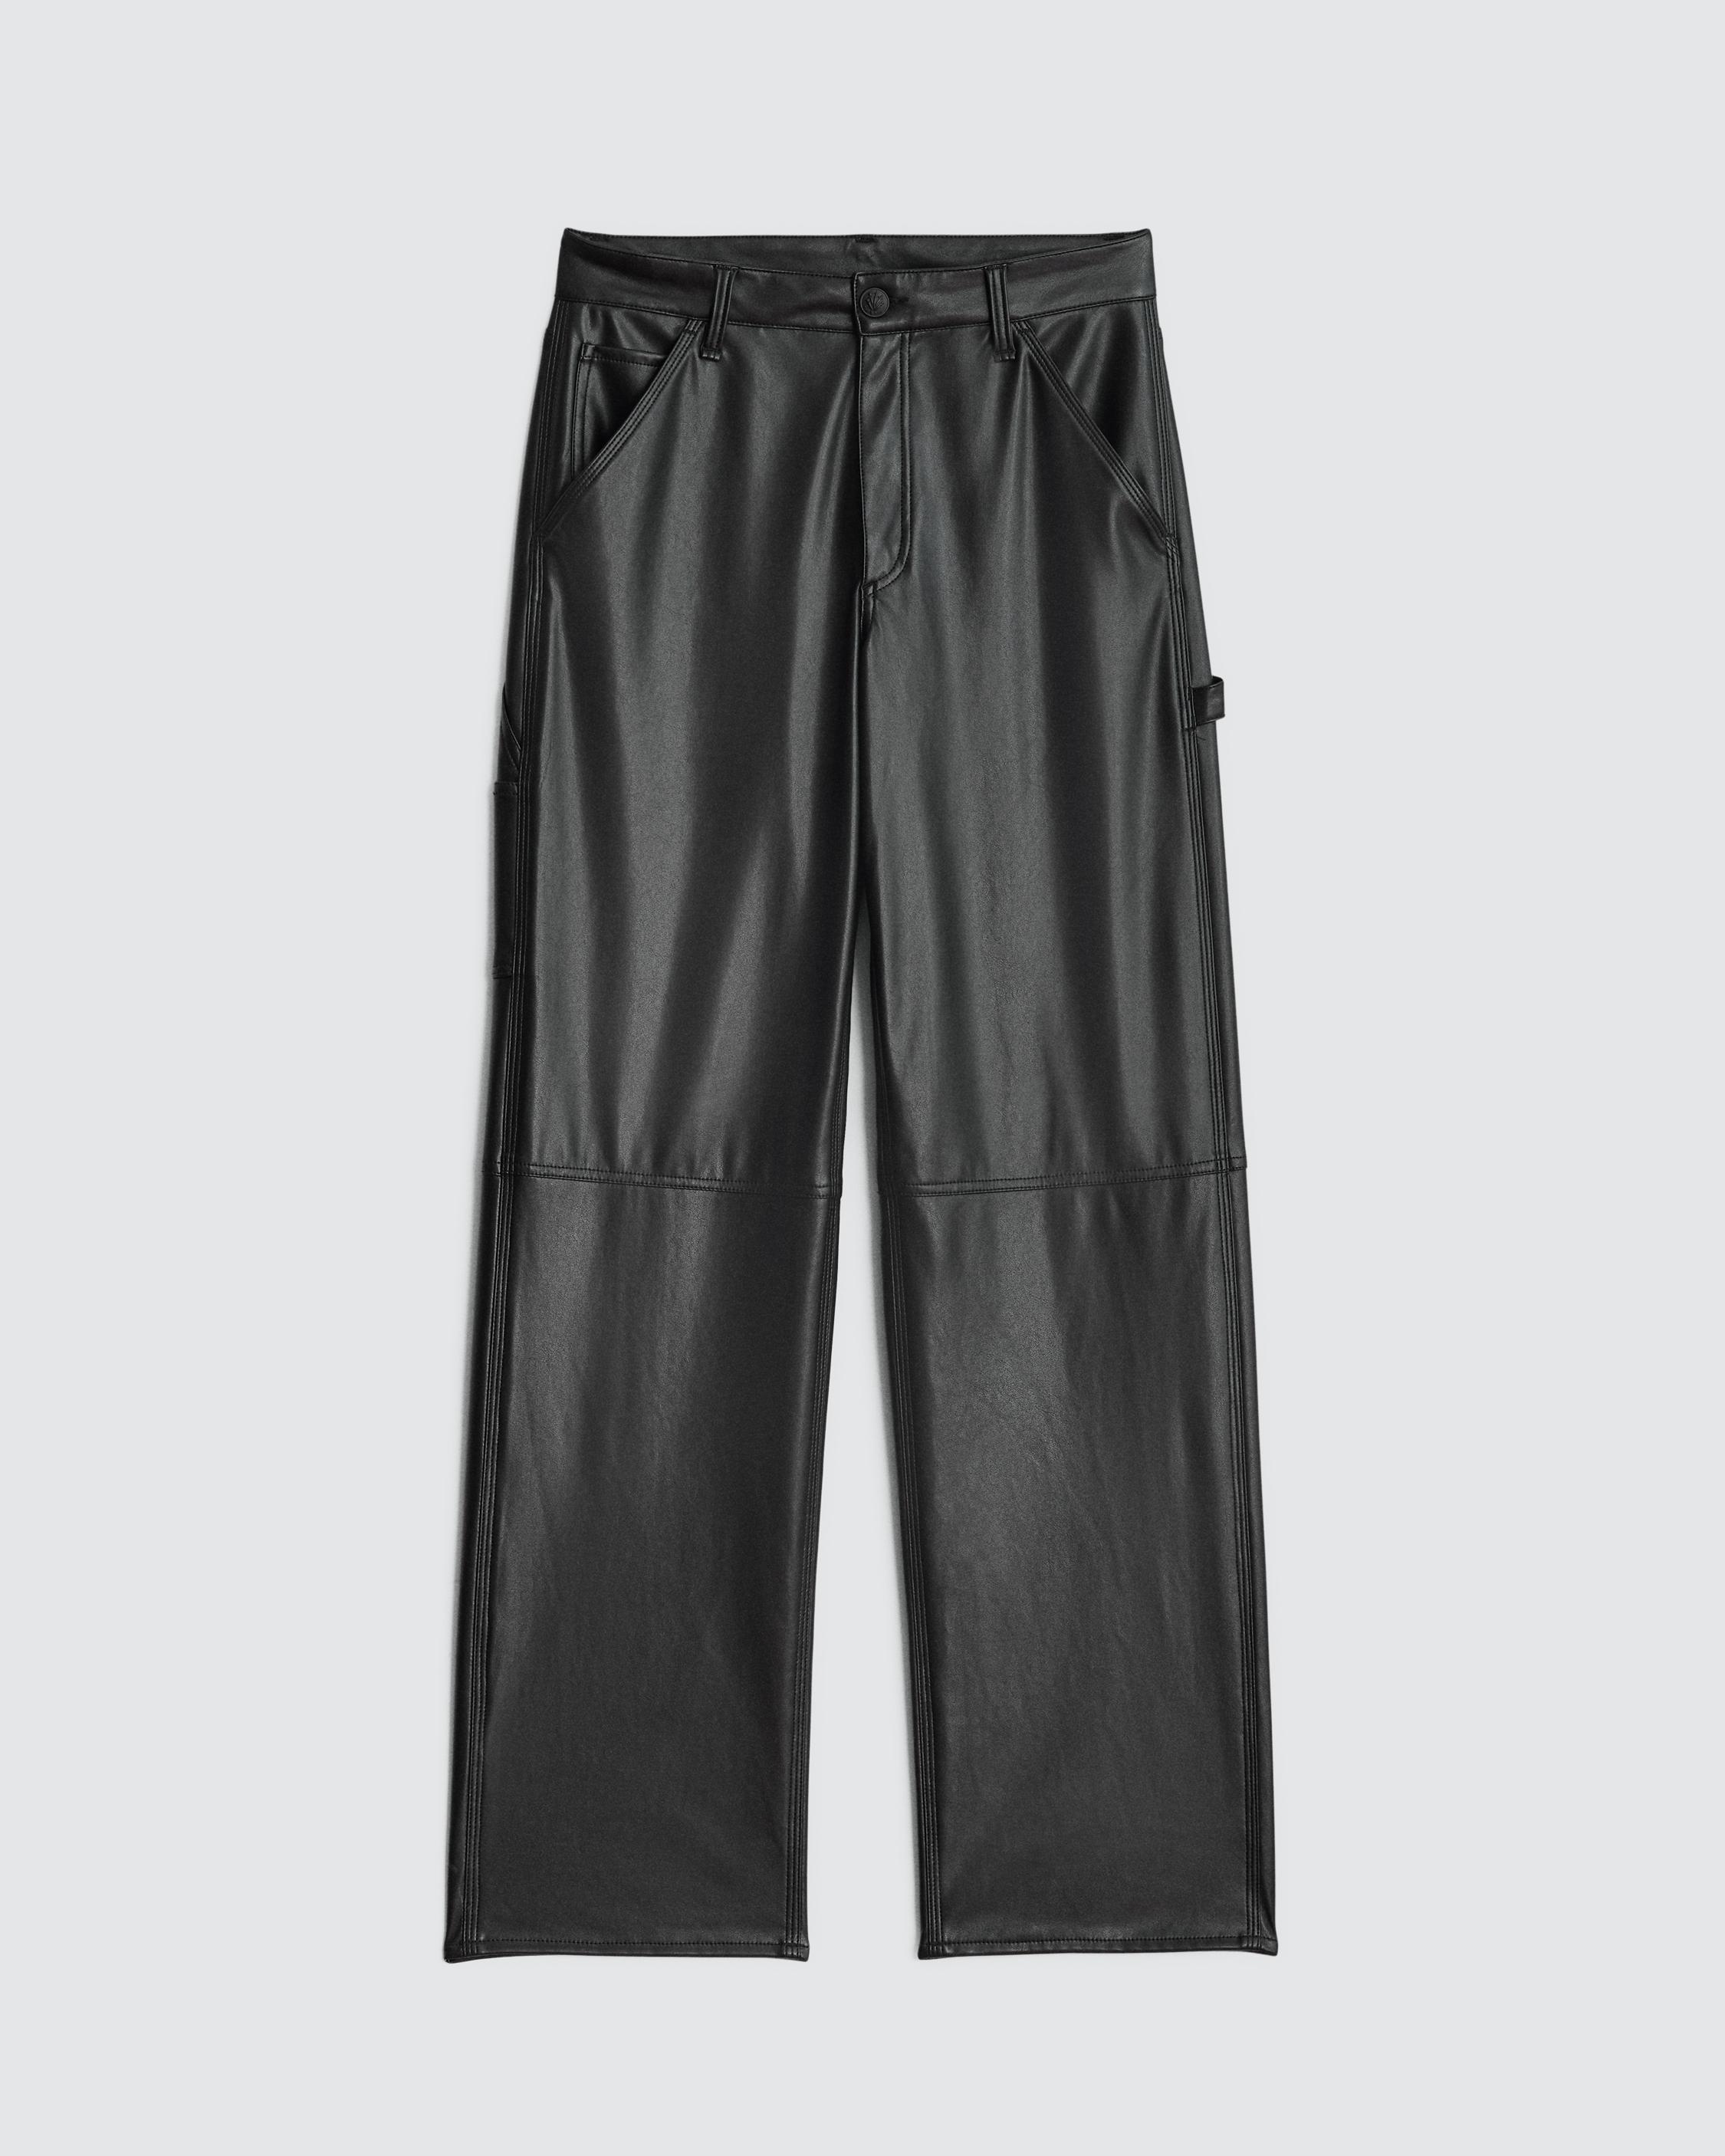 Sid Faux Leather Carpenter Pant
Relaxed Fit - 1